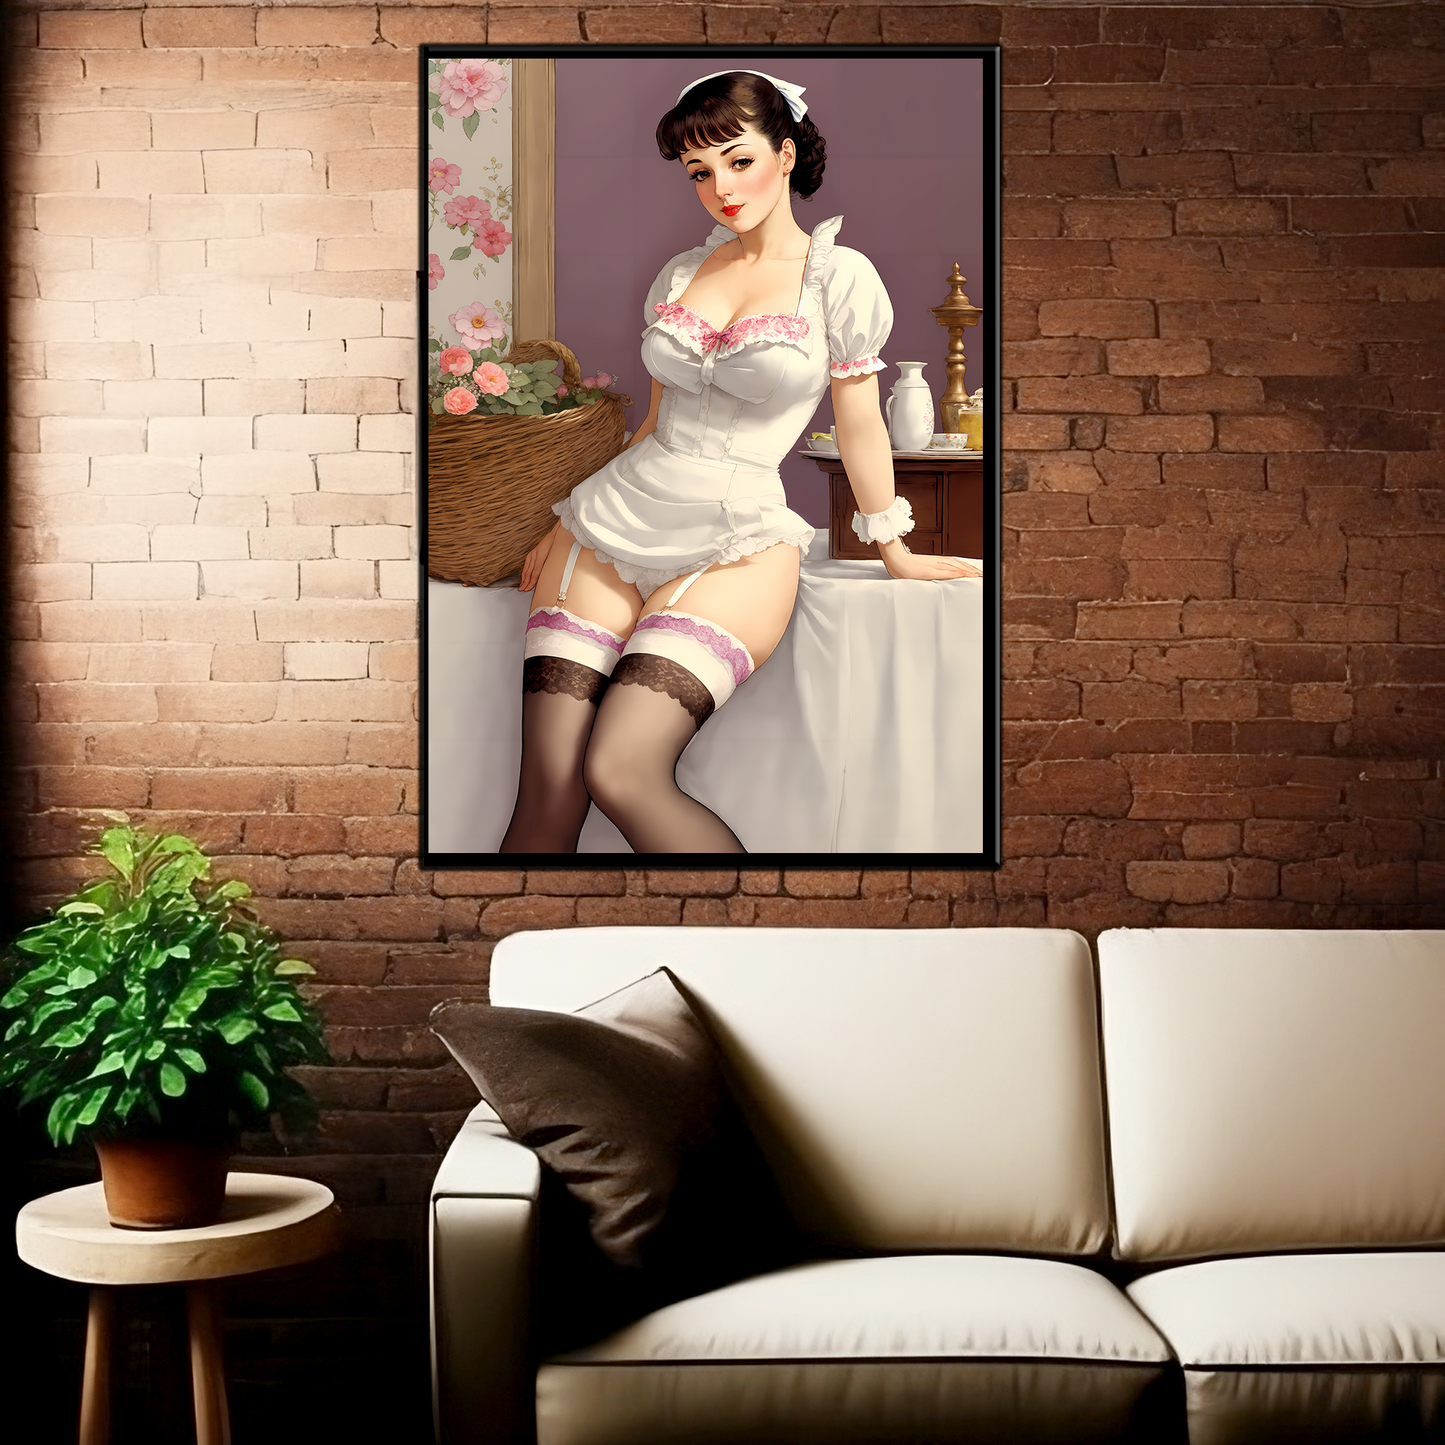 Daily Pinup #21 - The Maid Wall Art